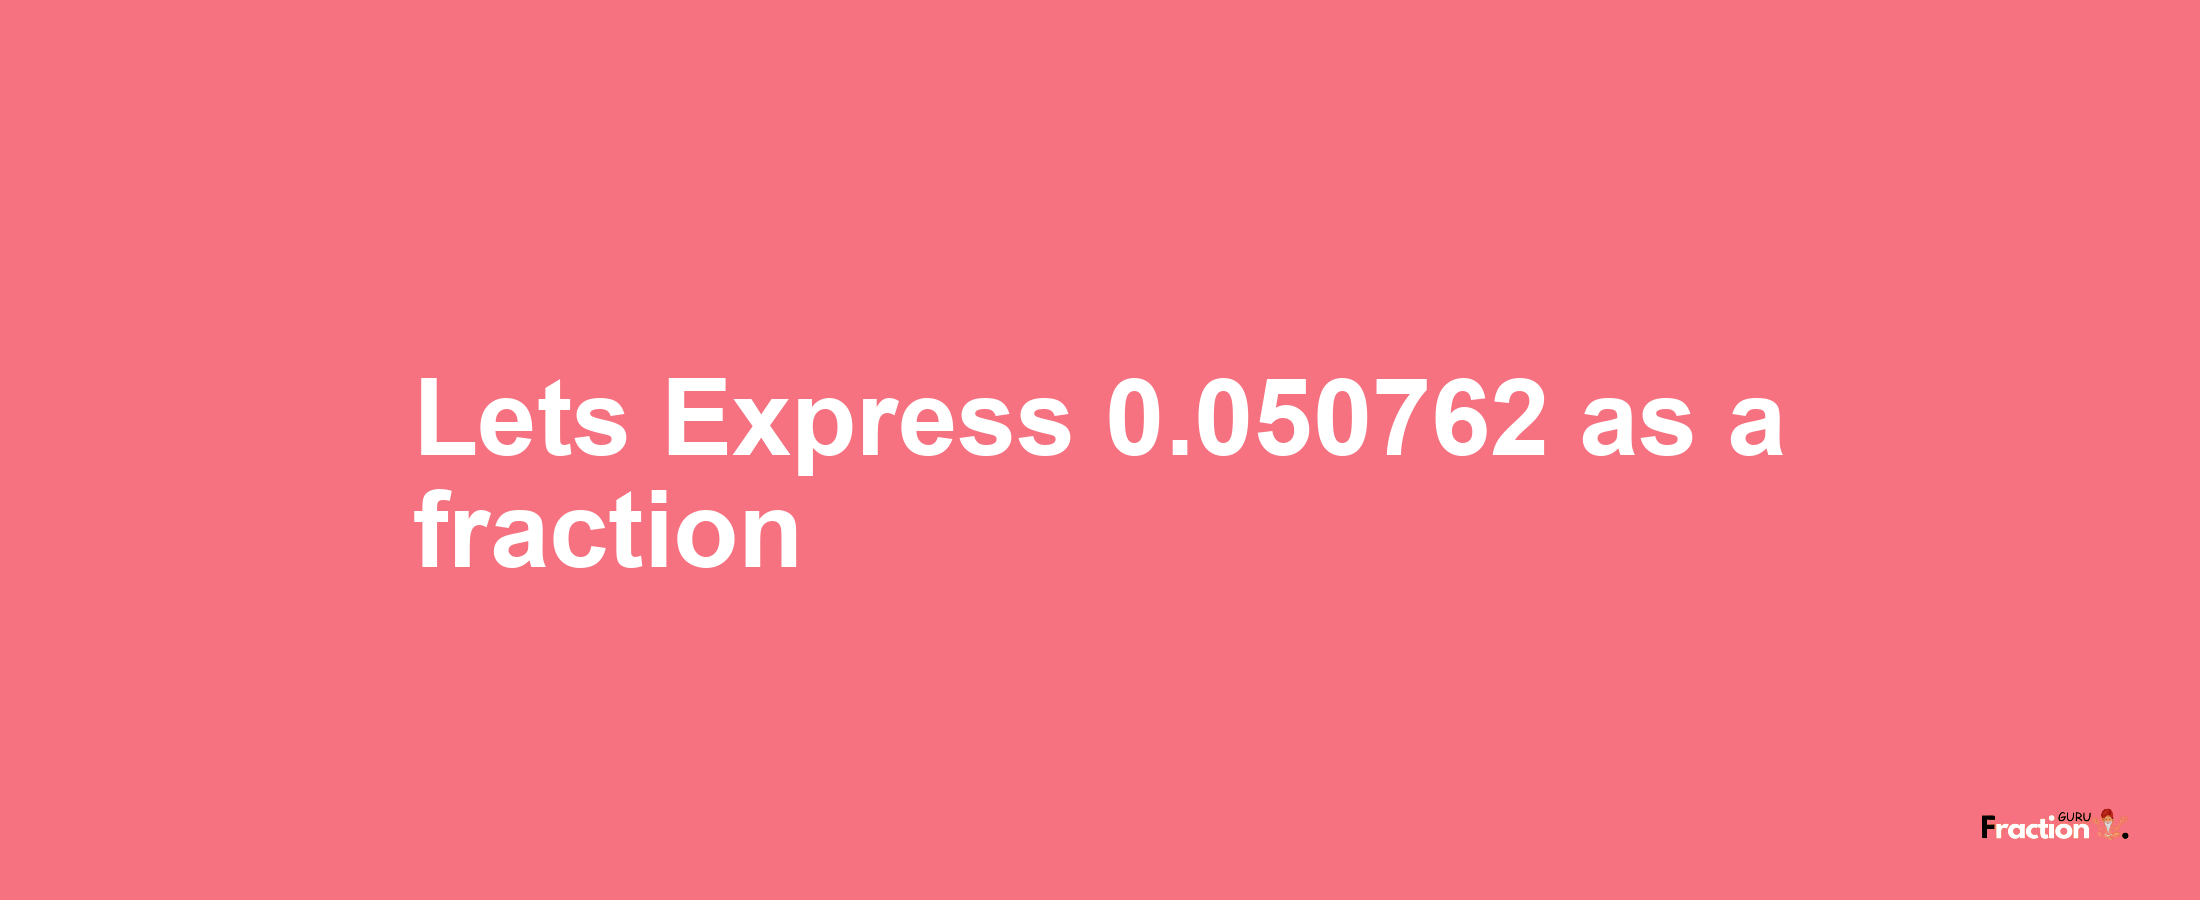 Lets Express 0.050762 as afraction